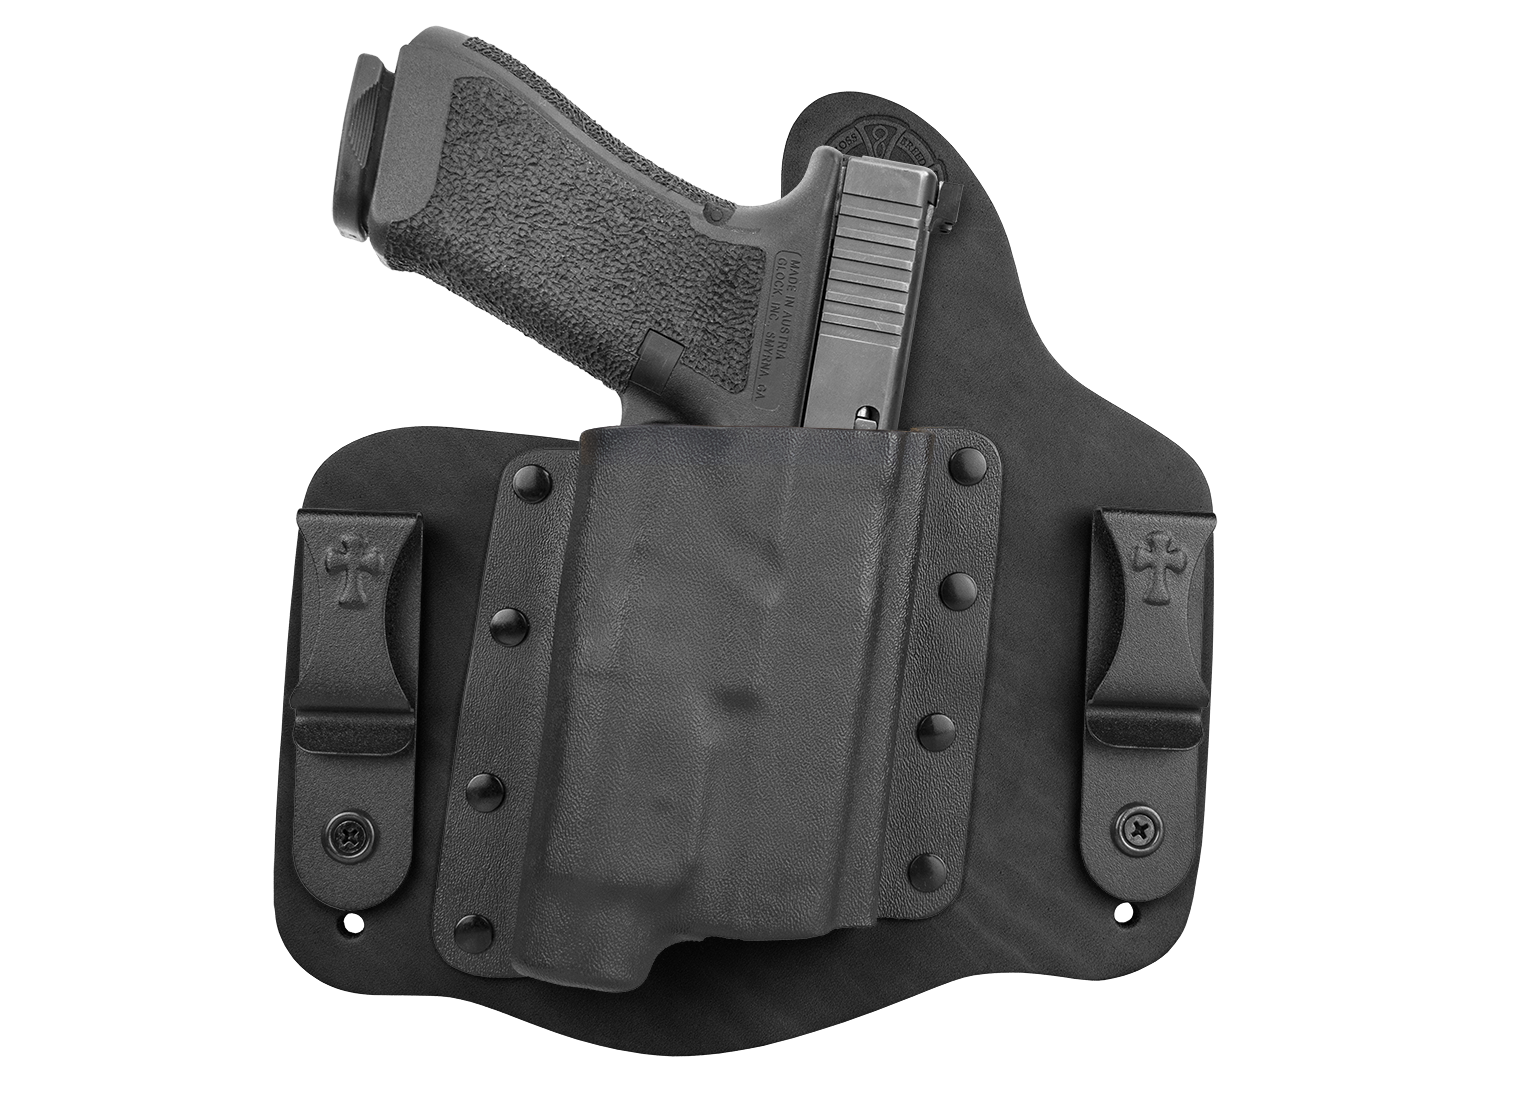 Details about   Black & White USA OWB Kydex Holster For Glock 